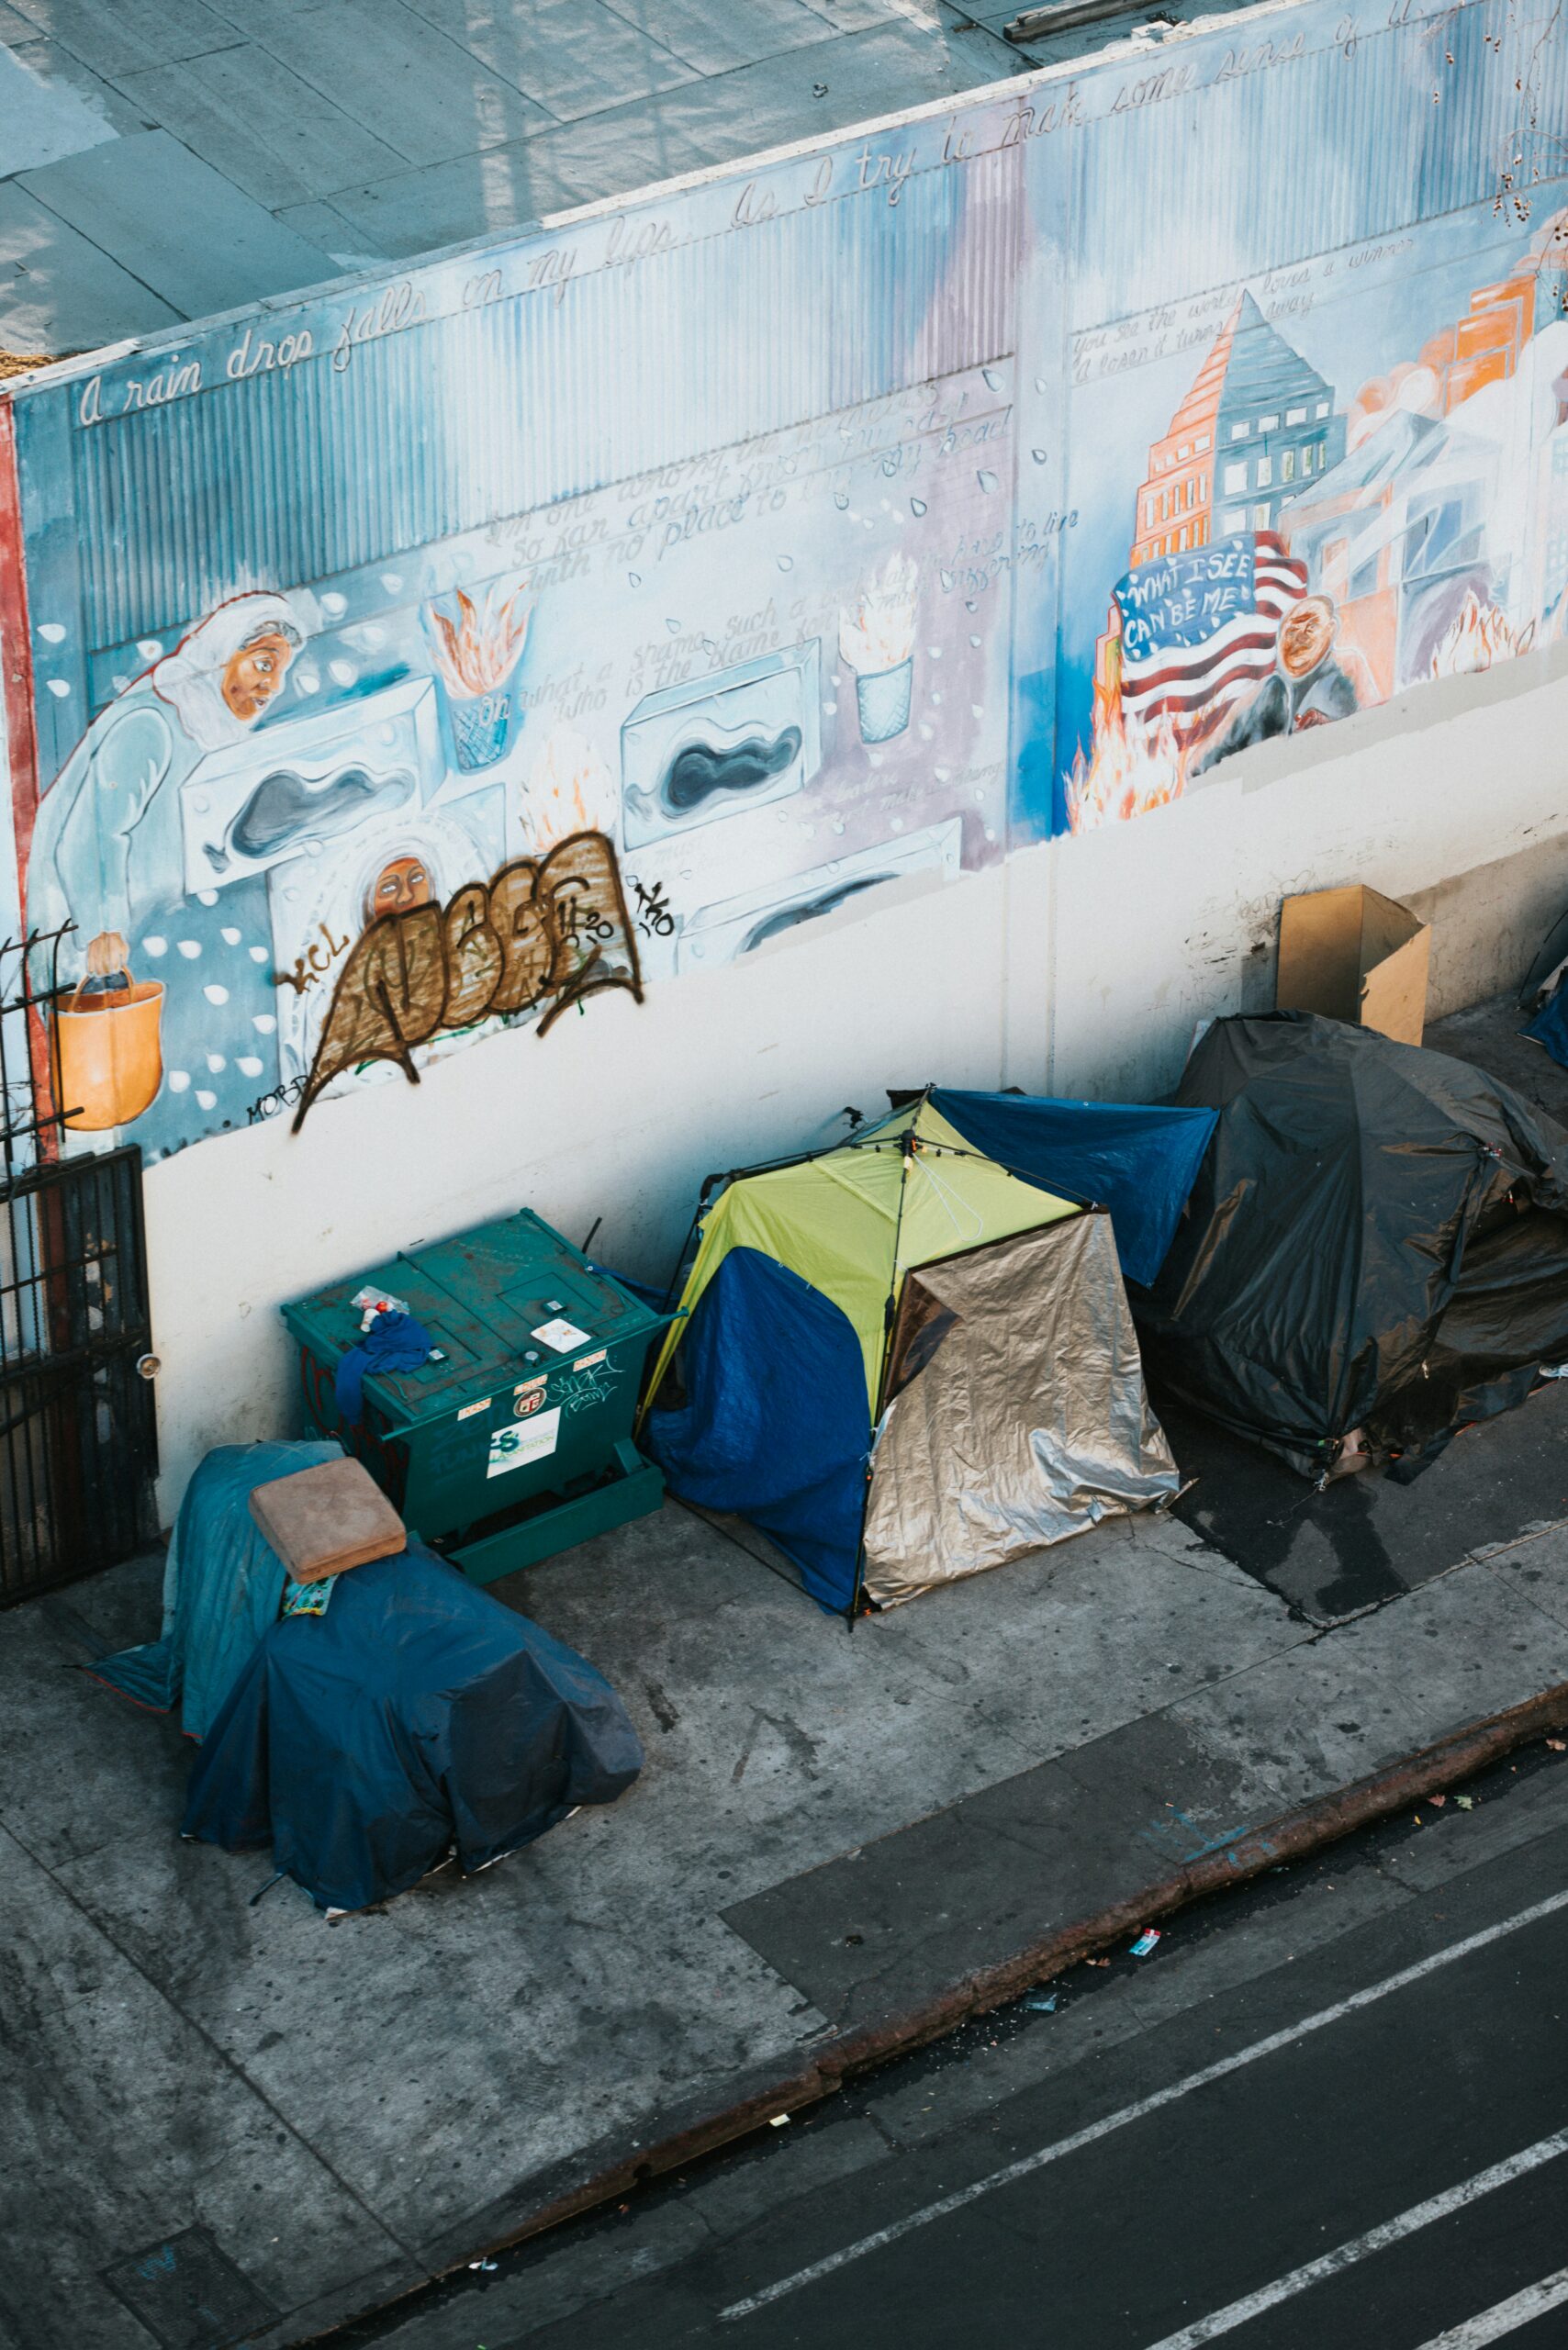 Resources and Benefits for Homeless and Disabled Individuals in Washington, DC